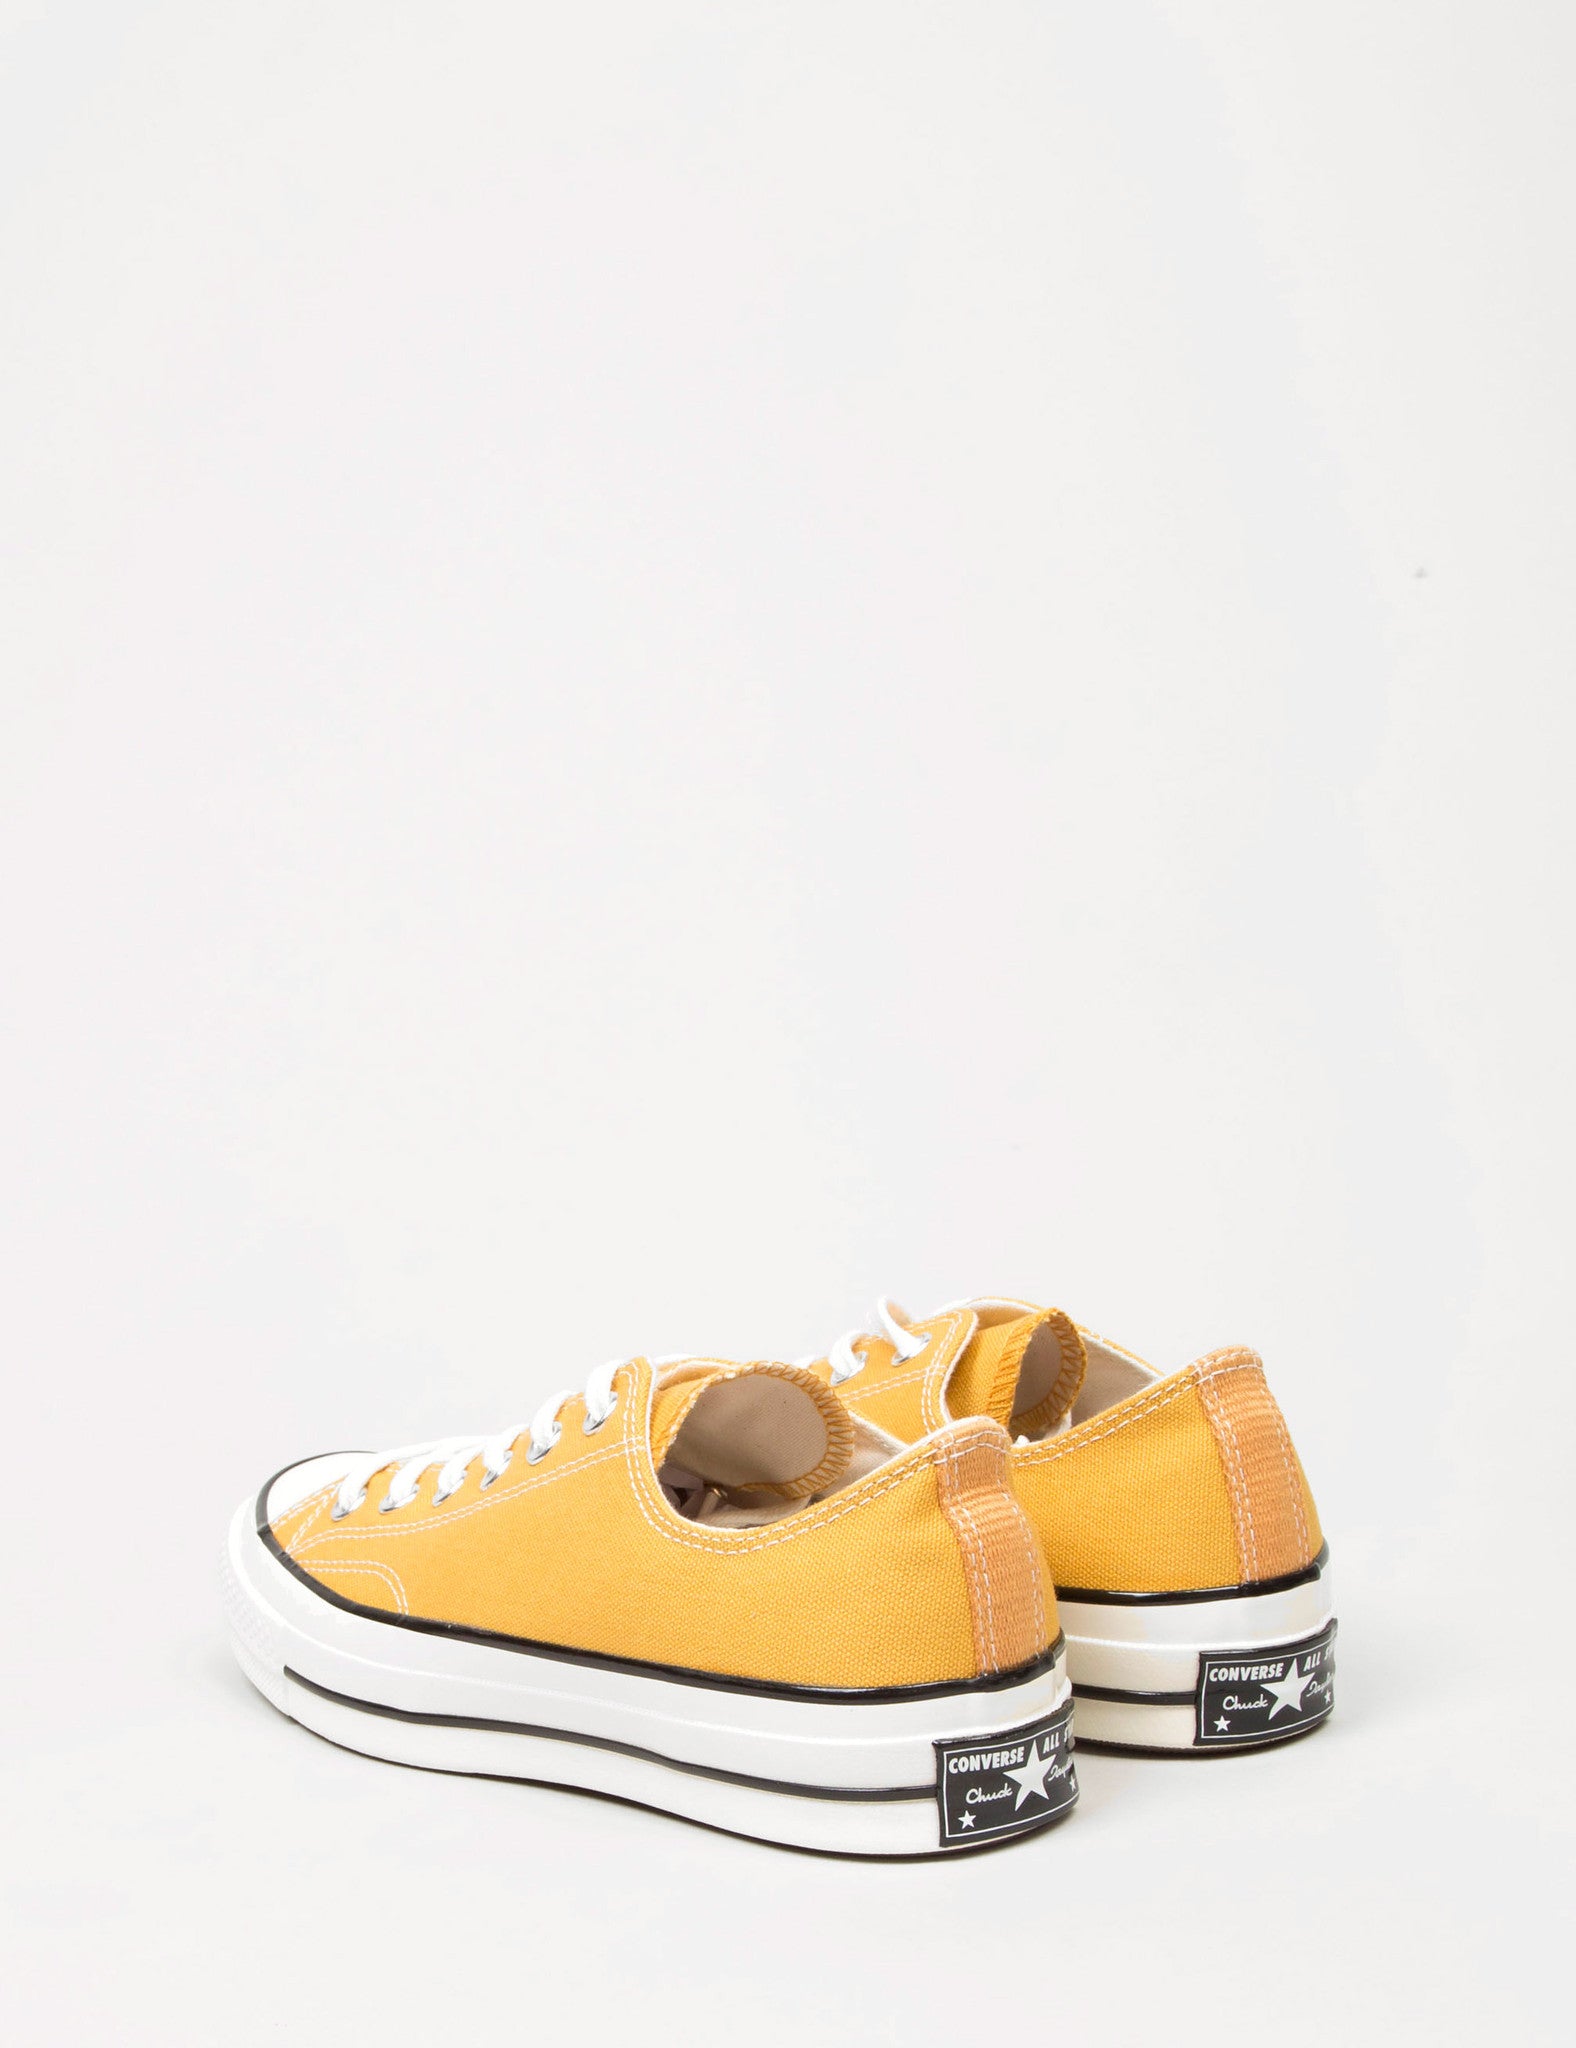 Converse 70's Chuck Taylor Low - Sunflower Yellow | URBAN EXCESS.